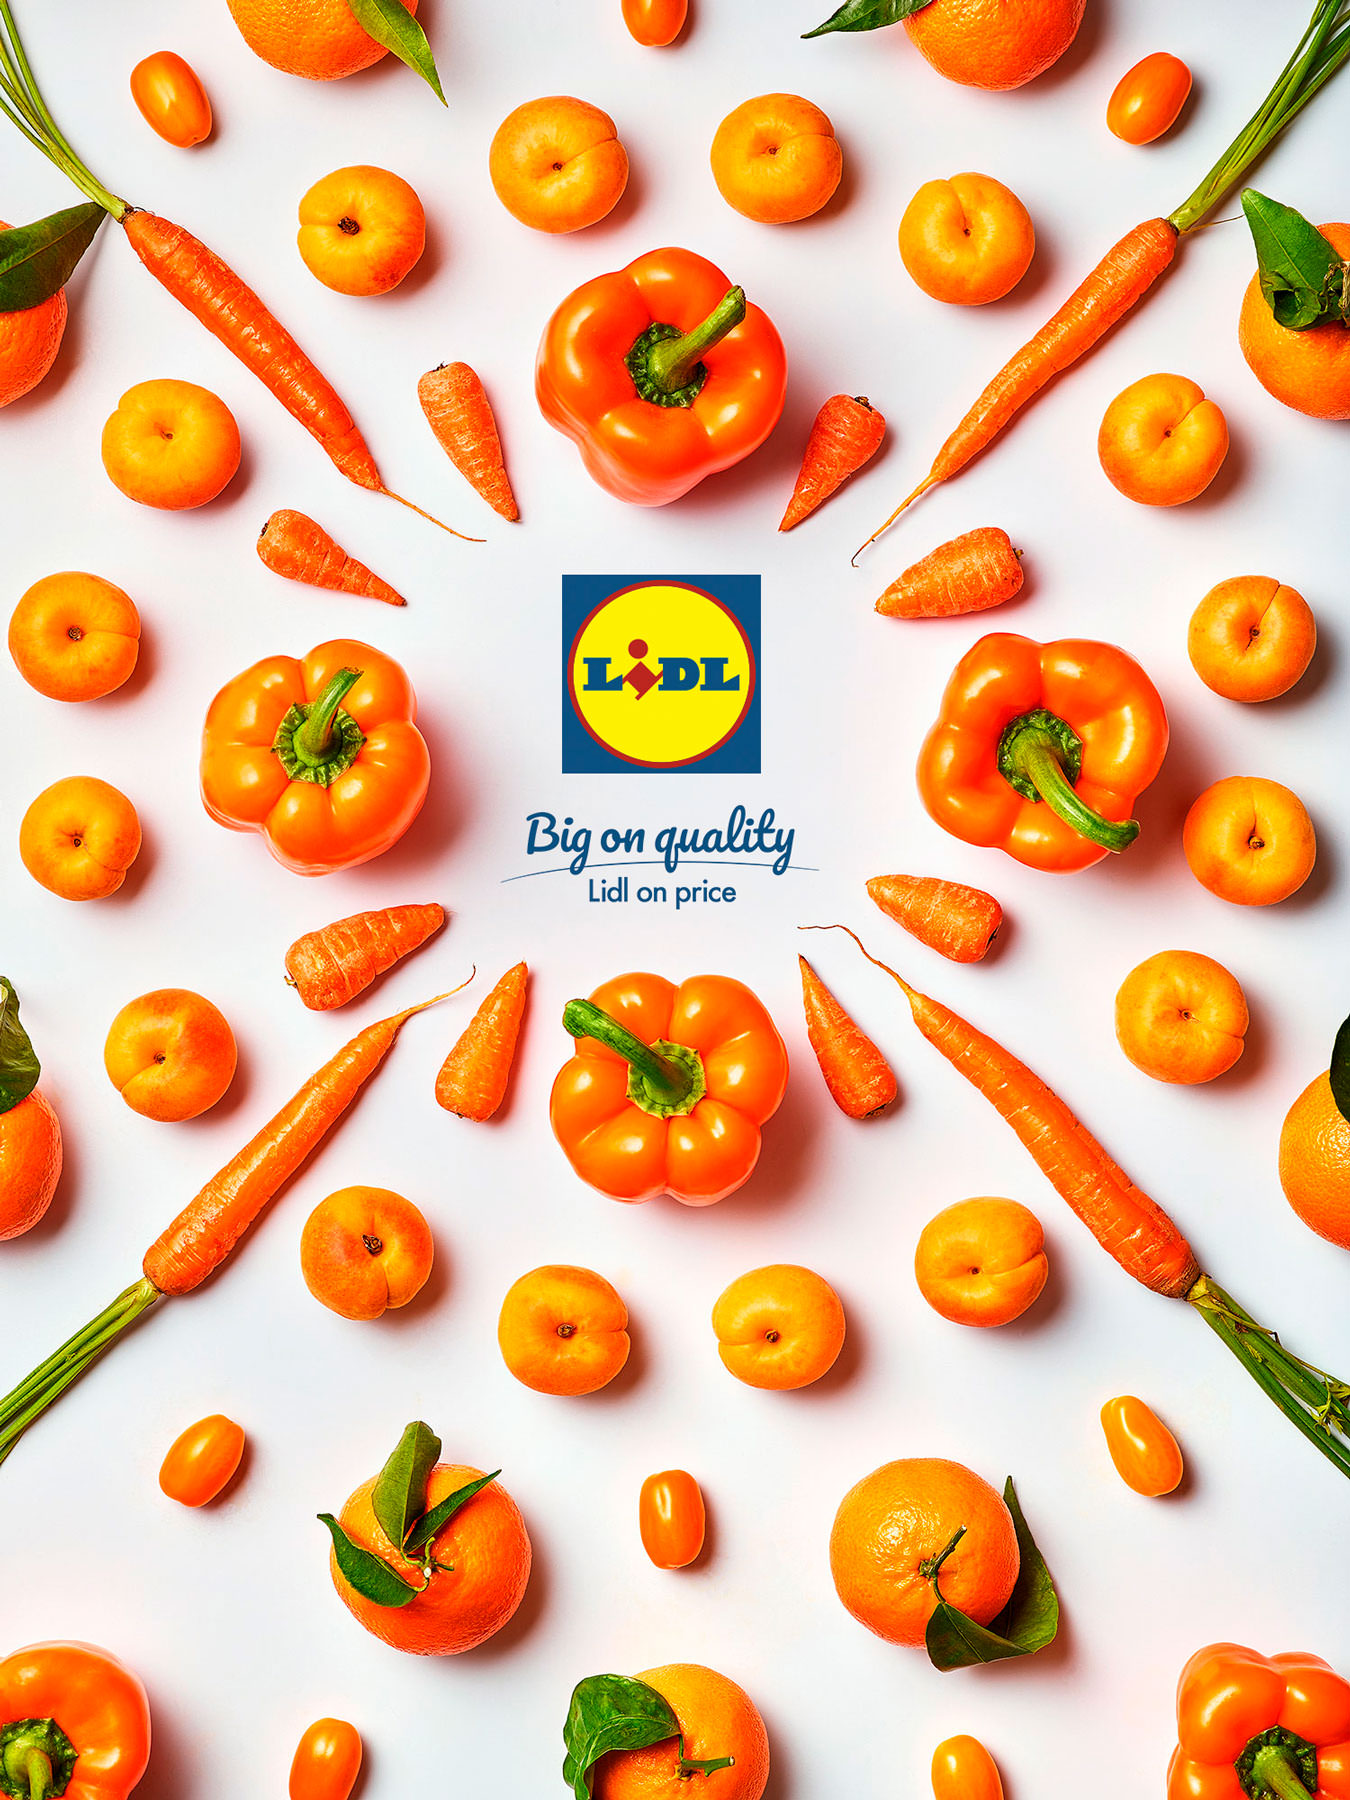 Orange fruit and vegetables arranged graphically around a central lidl logo - London Food & Drinks Photographer